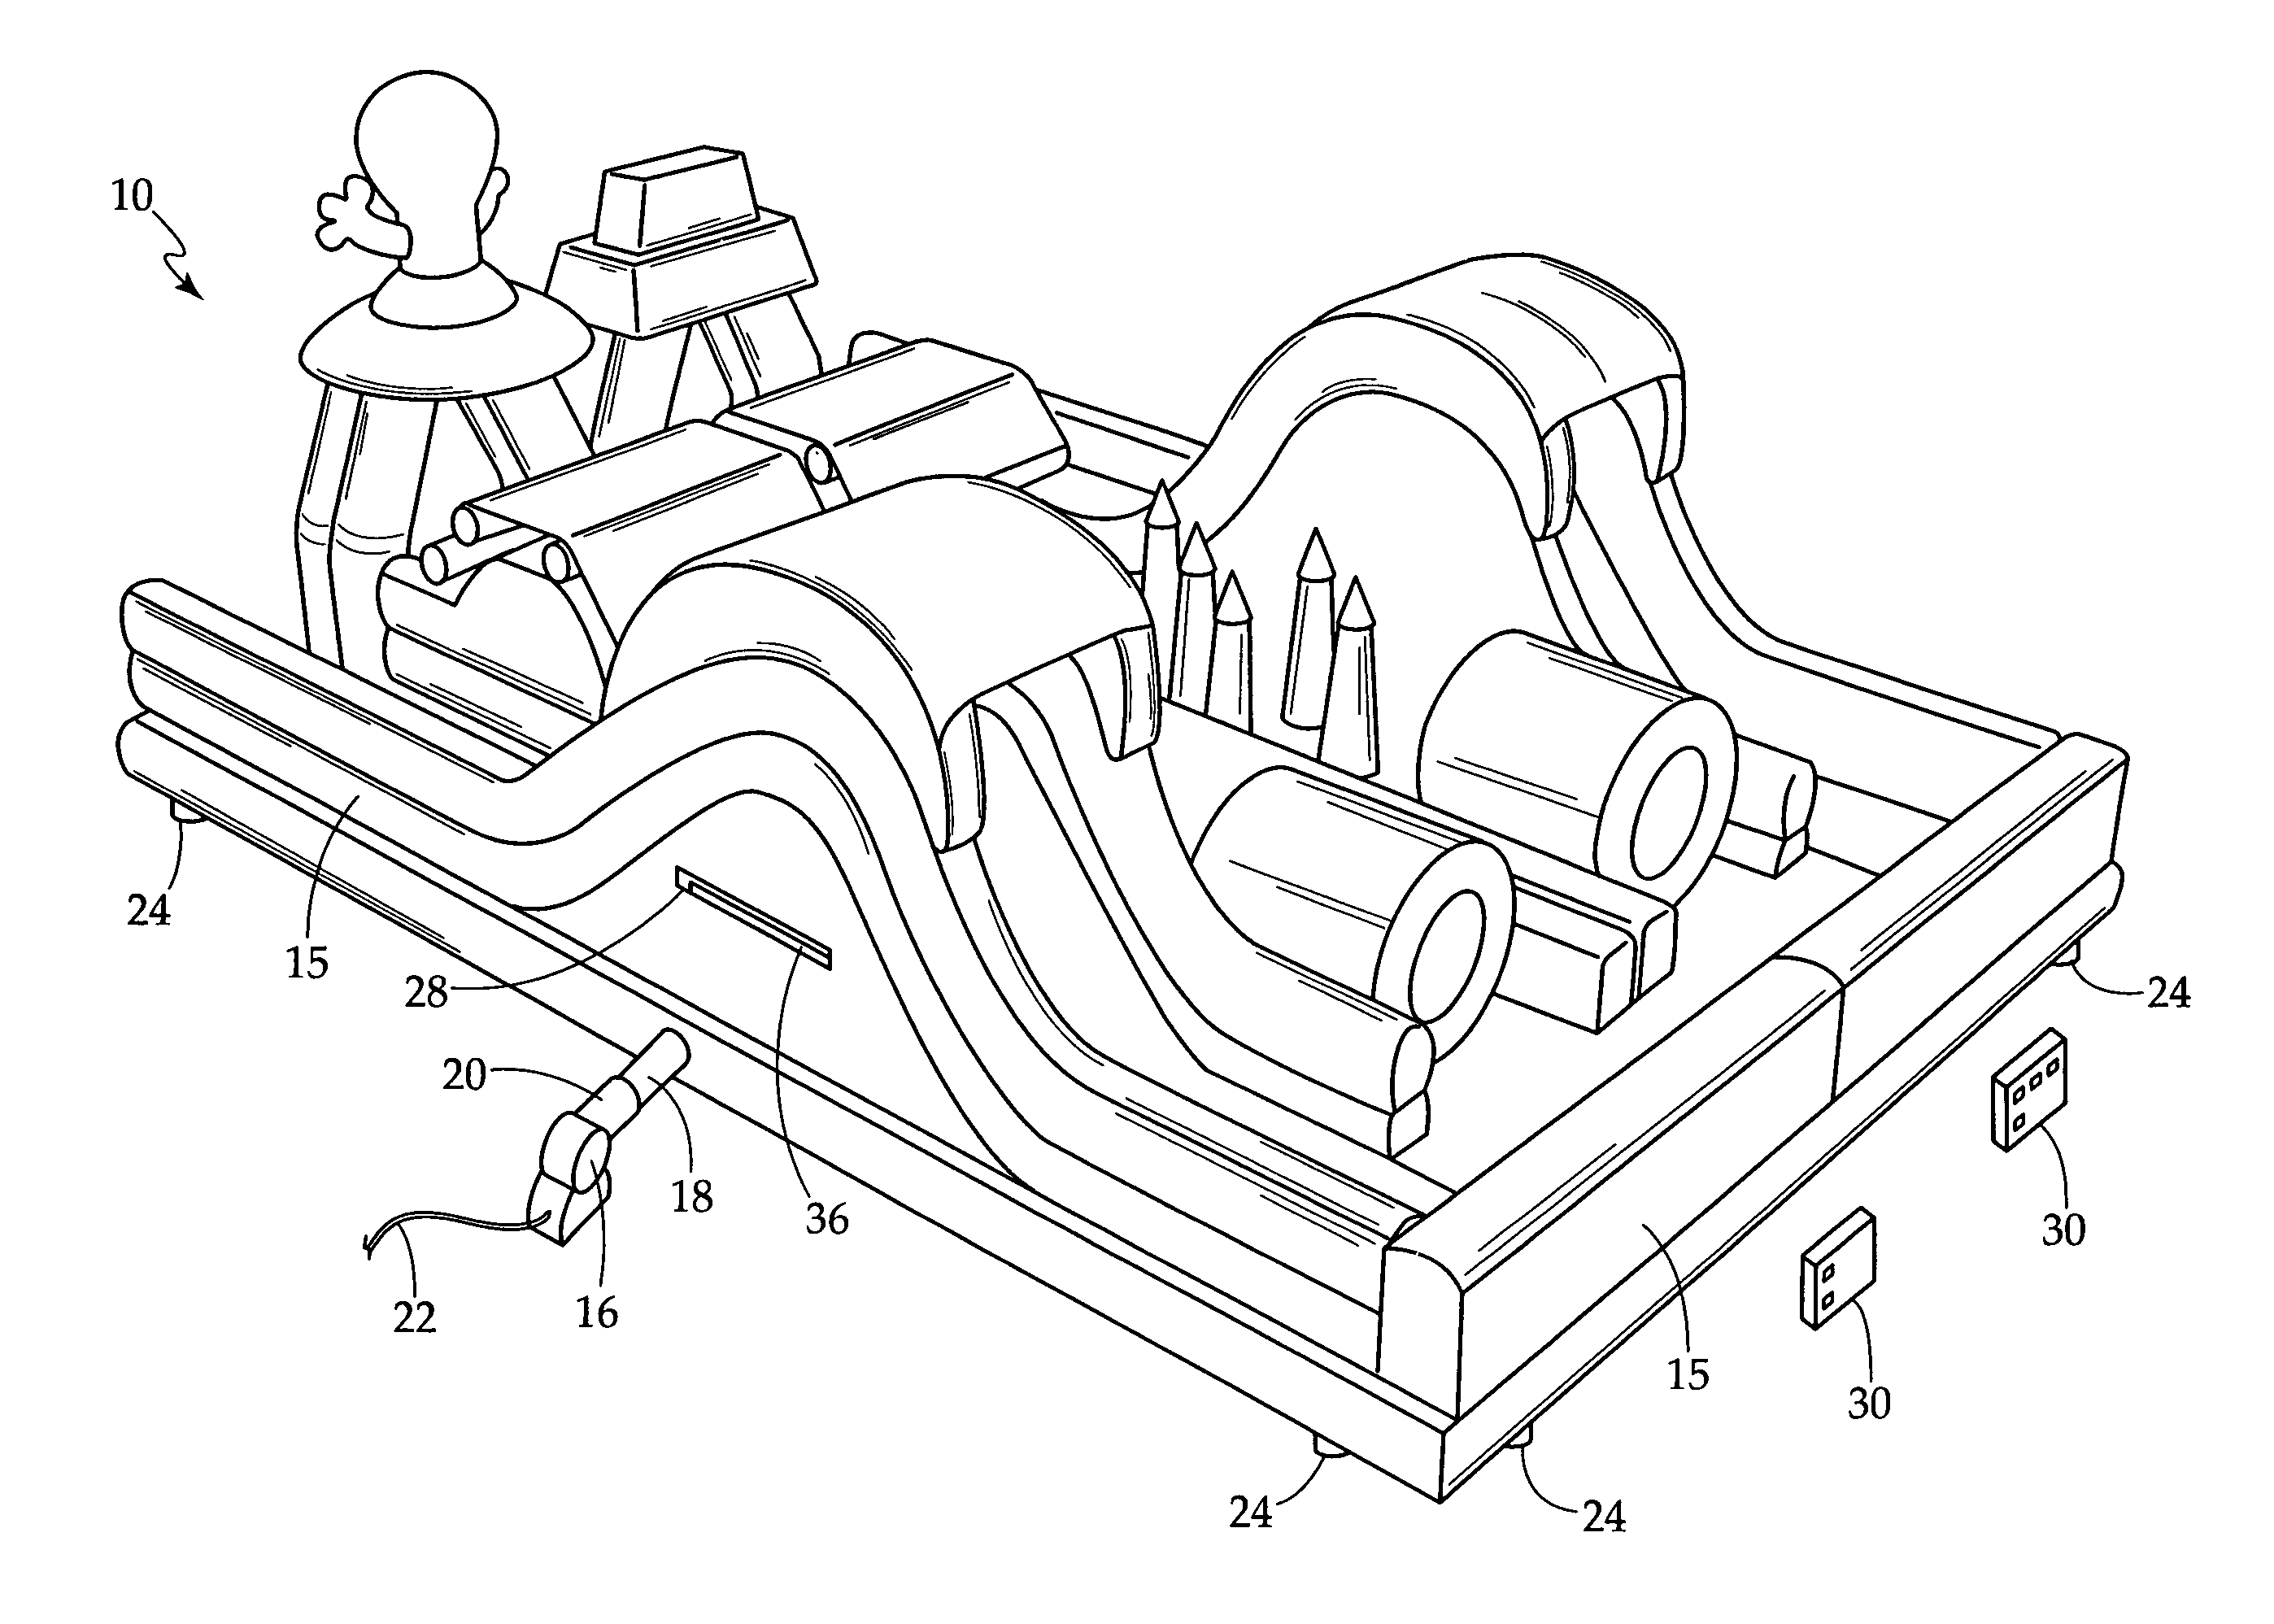 Inflatable interactive amusement structure incorporating electronic audio and visual effects